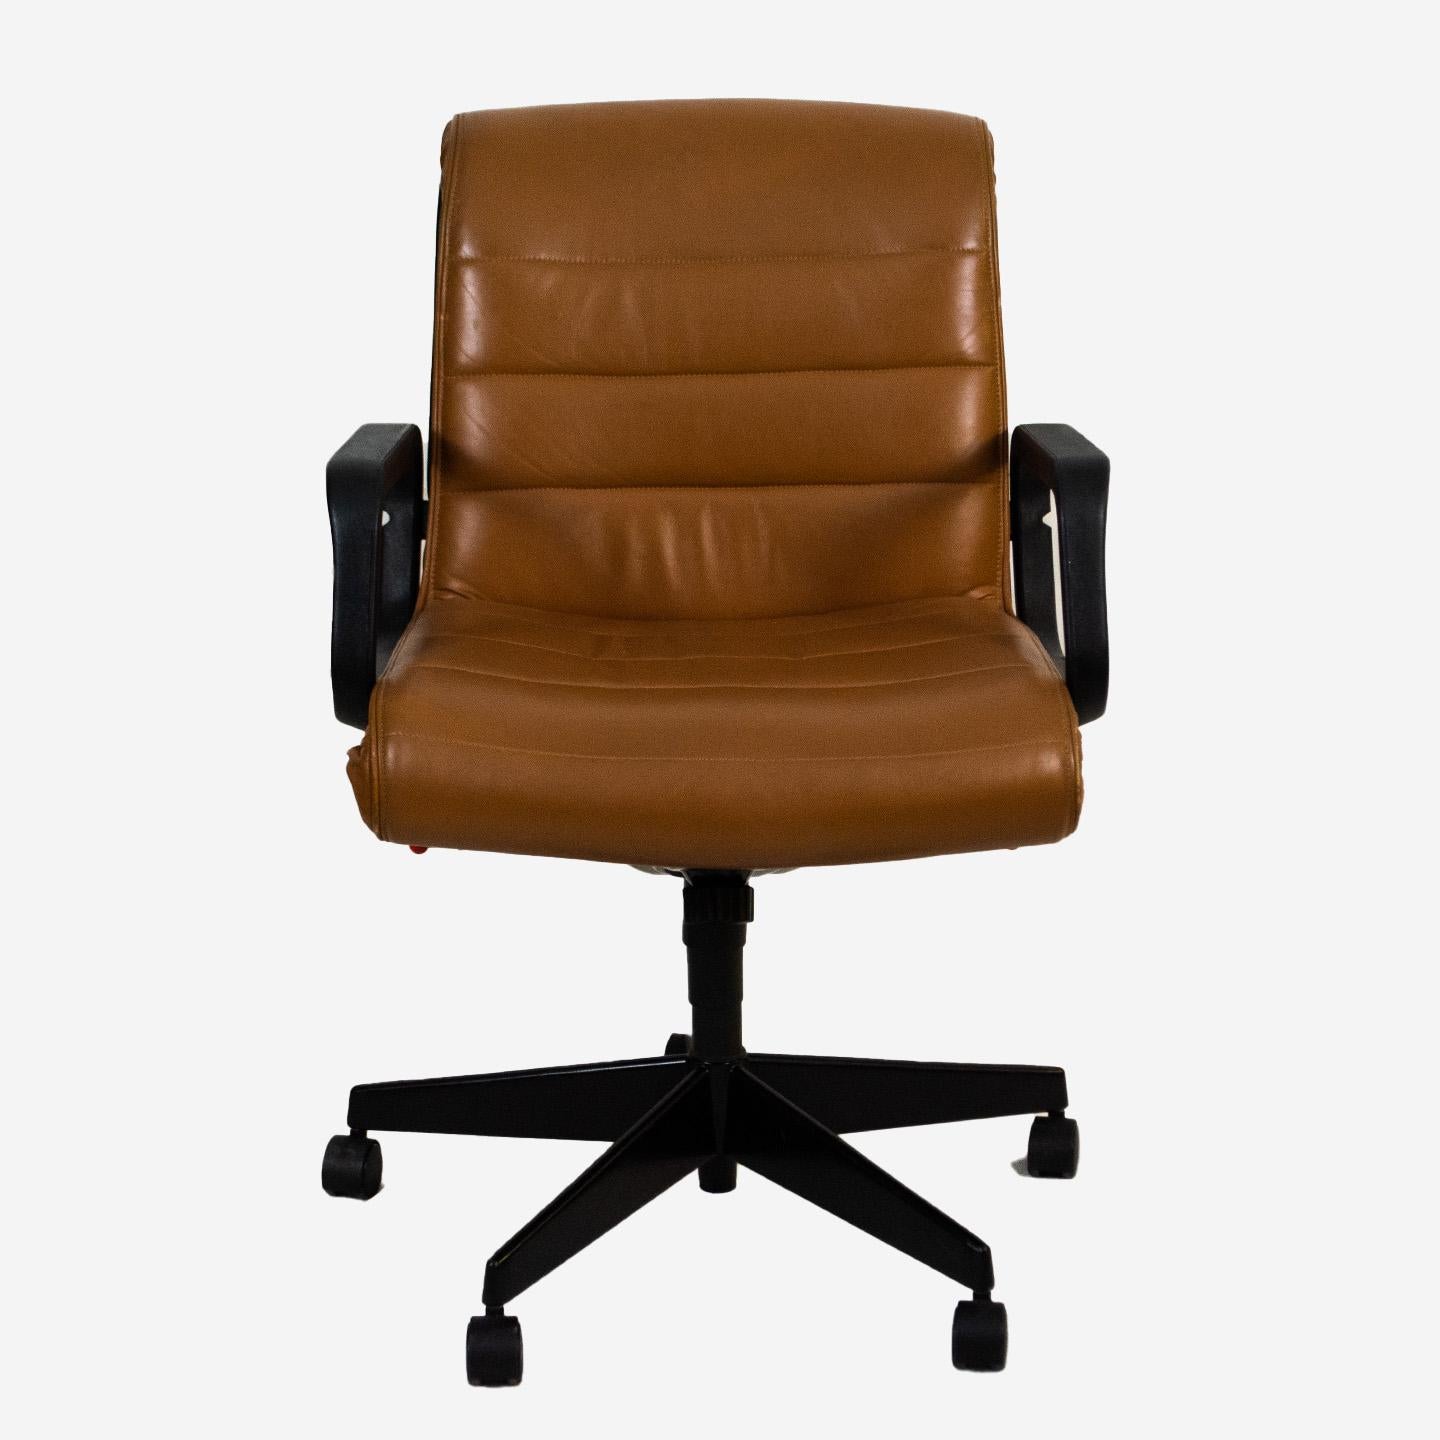 The Executive office chair designed by Richard Sapper for Knoll comes with a five star base, and upholstered in fine tan leather. This handsome office chair's trademark is its advanced ergonomic features to offer a seating most supportive and